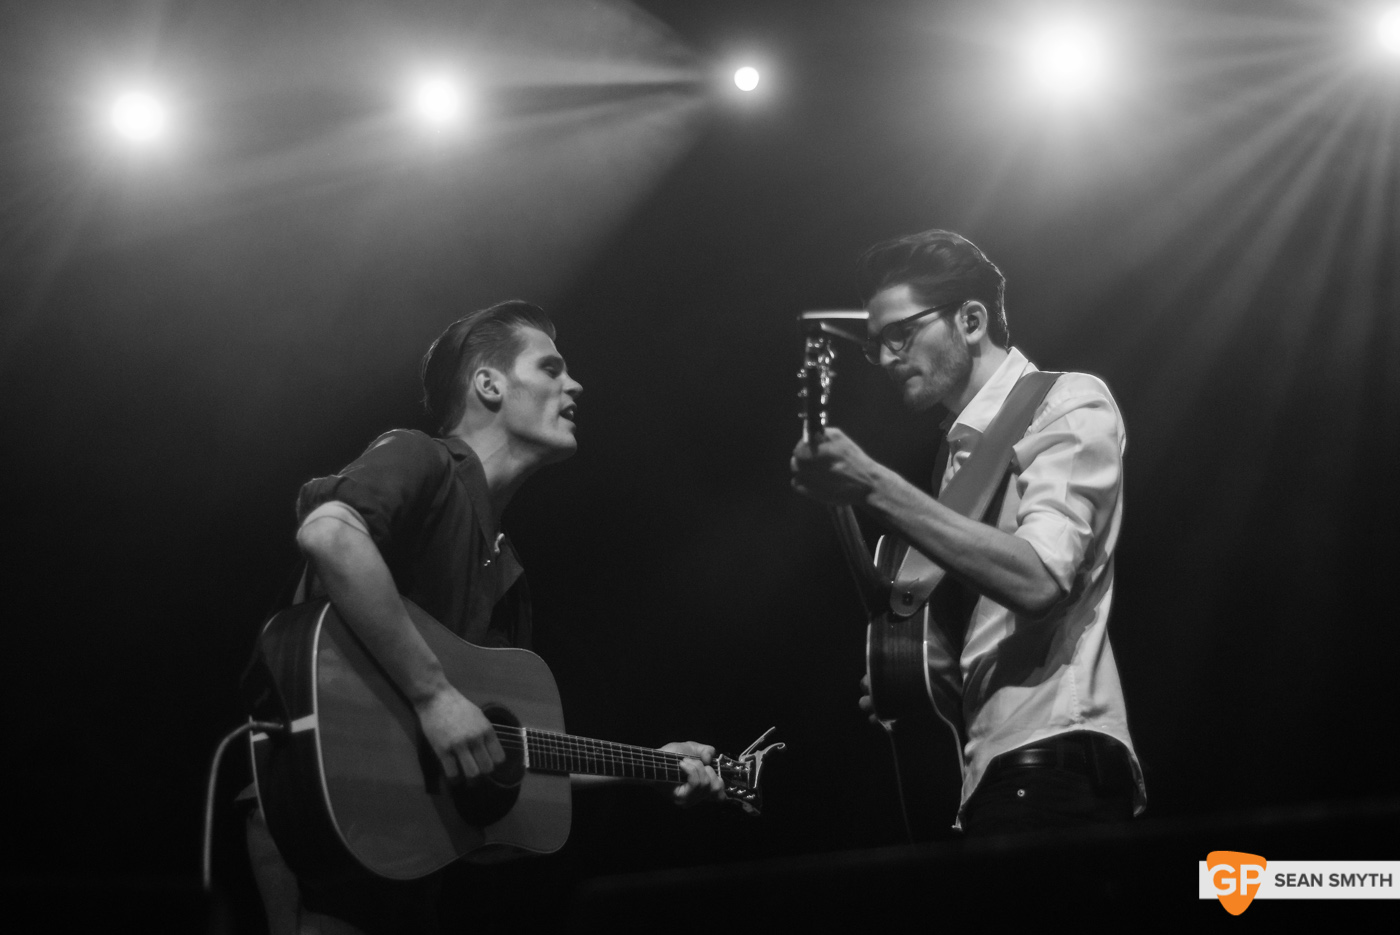 hudson-taylor-at-the-olympia-theatre-26-2-15-by-sean-smyth-7-of-26_16756764105_o